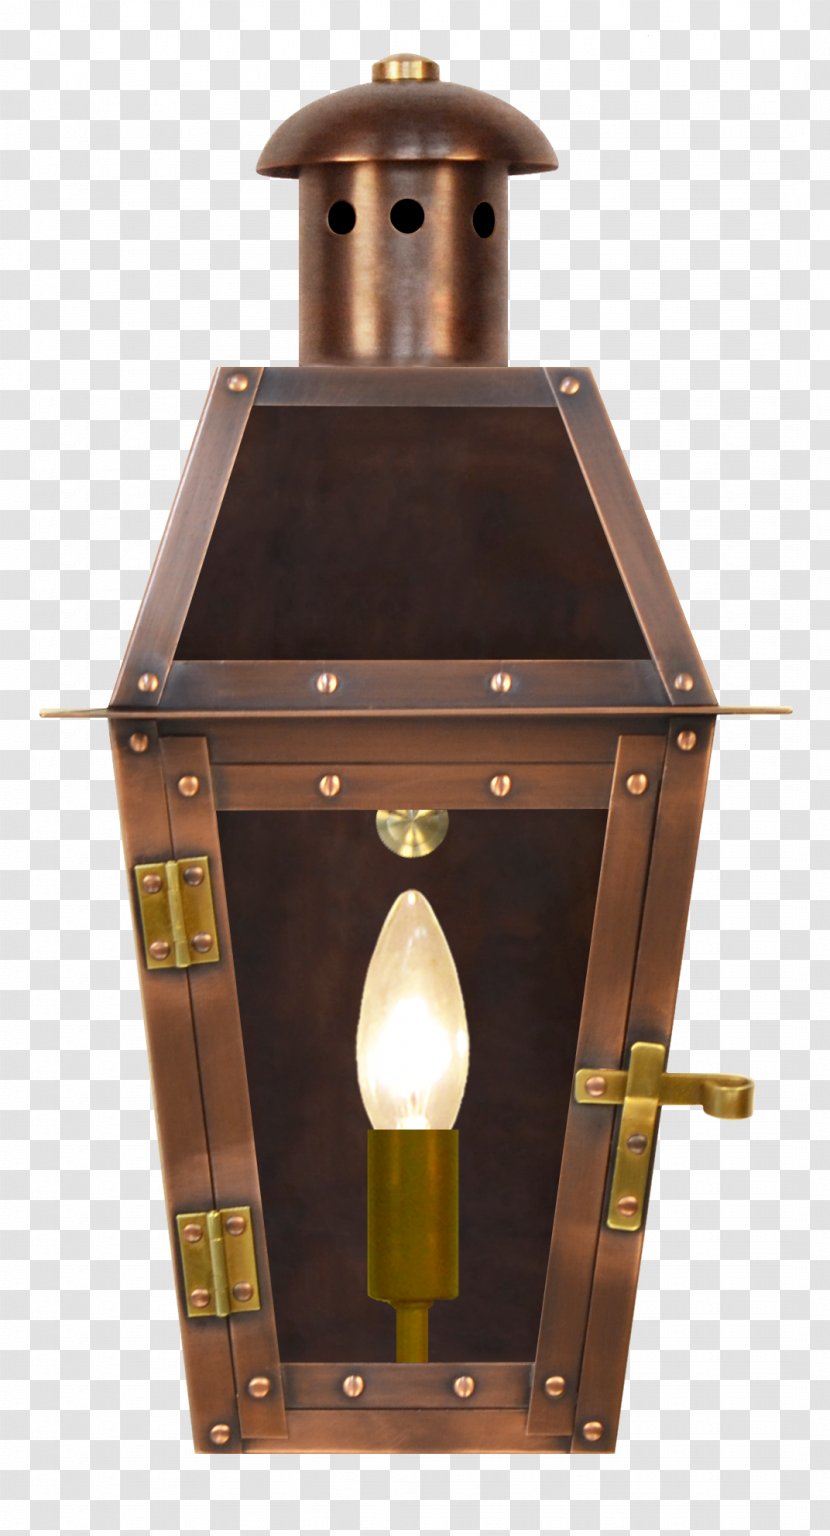 Natural Gas Propane Coppersmith Burner - Electricity - Lantern Mosque Transparent PNG